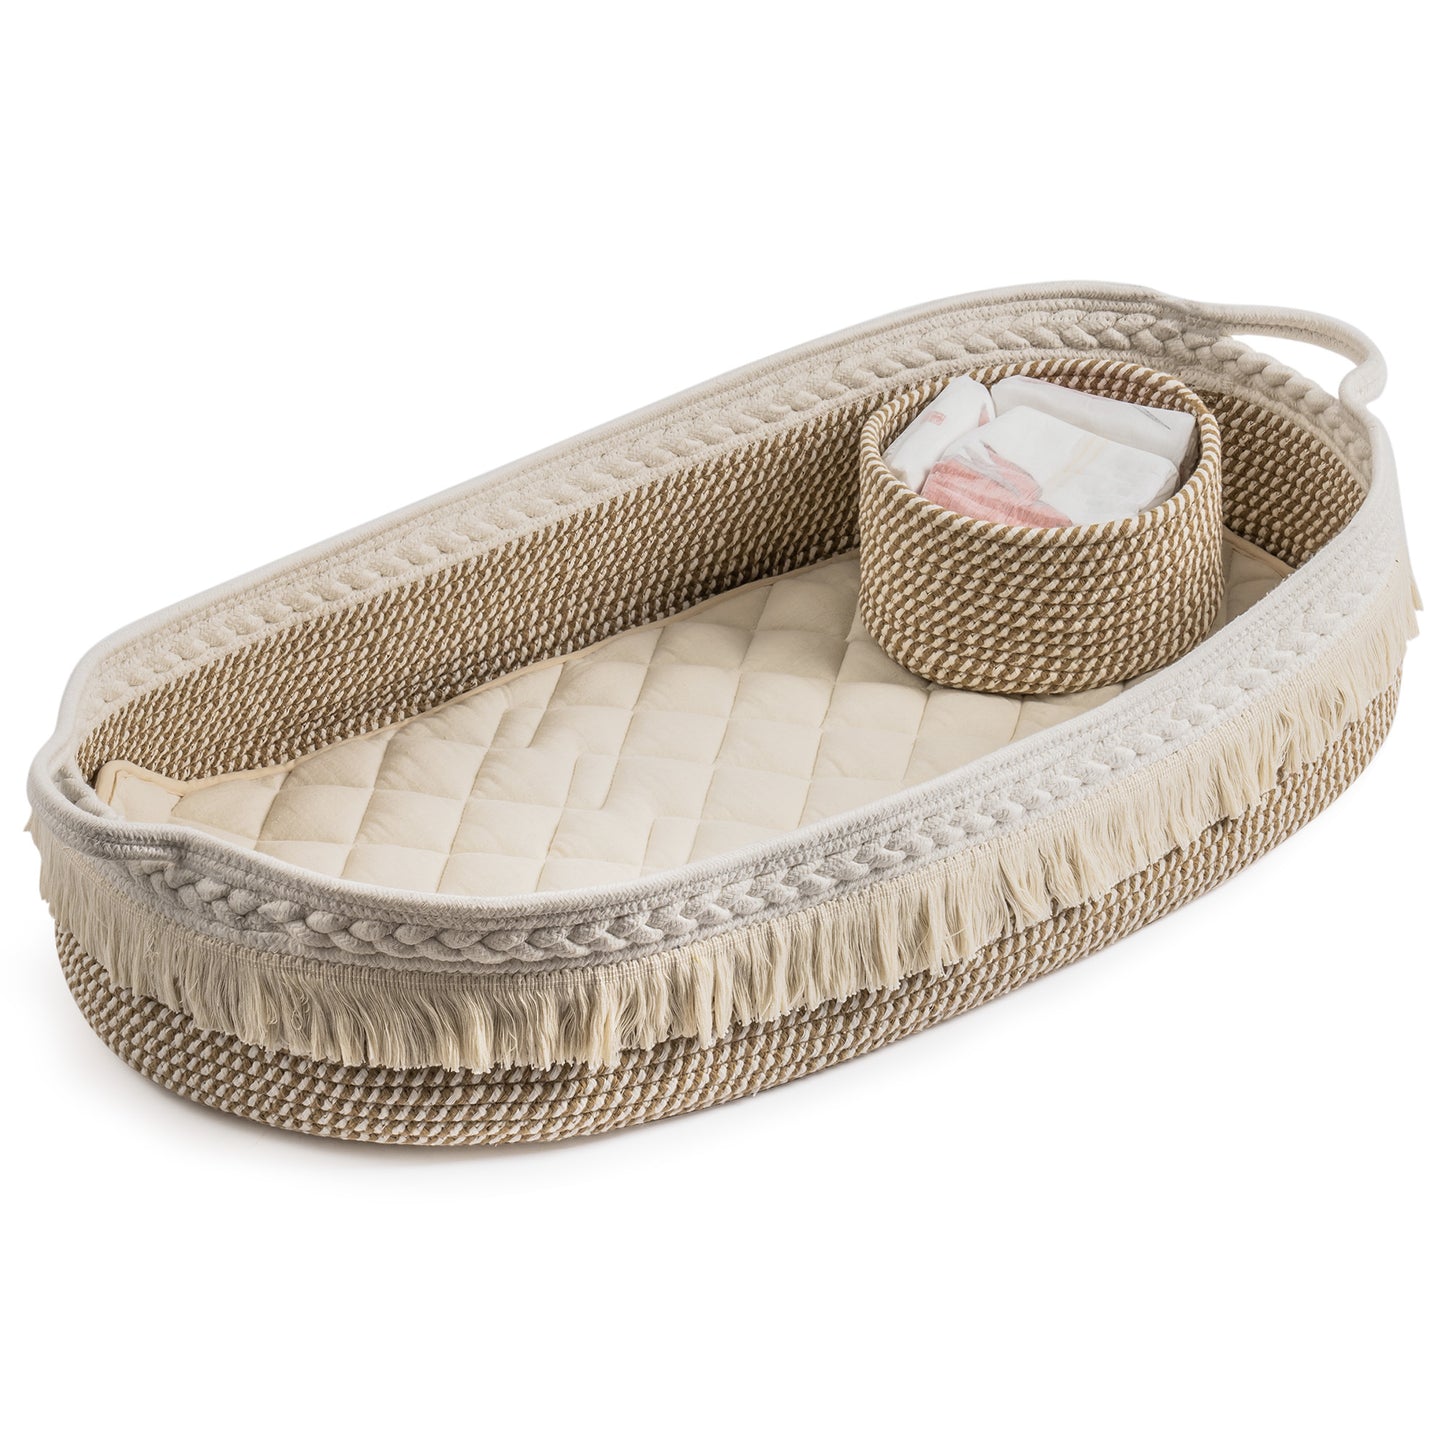 Baby Changing Basket; Handmade Woven Cotton Rope Moses Basket with Fringe